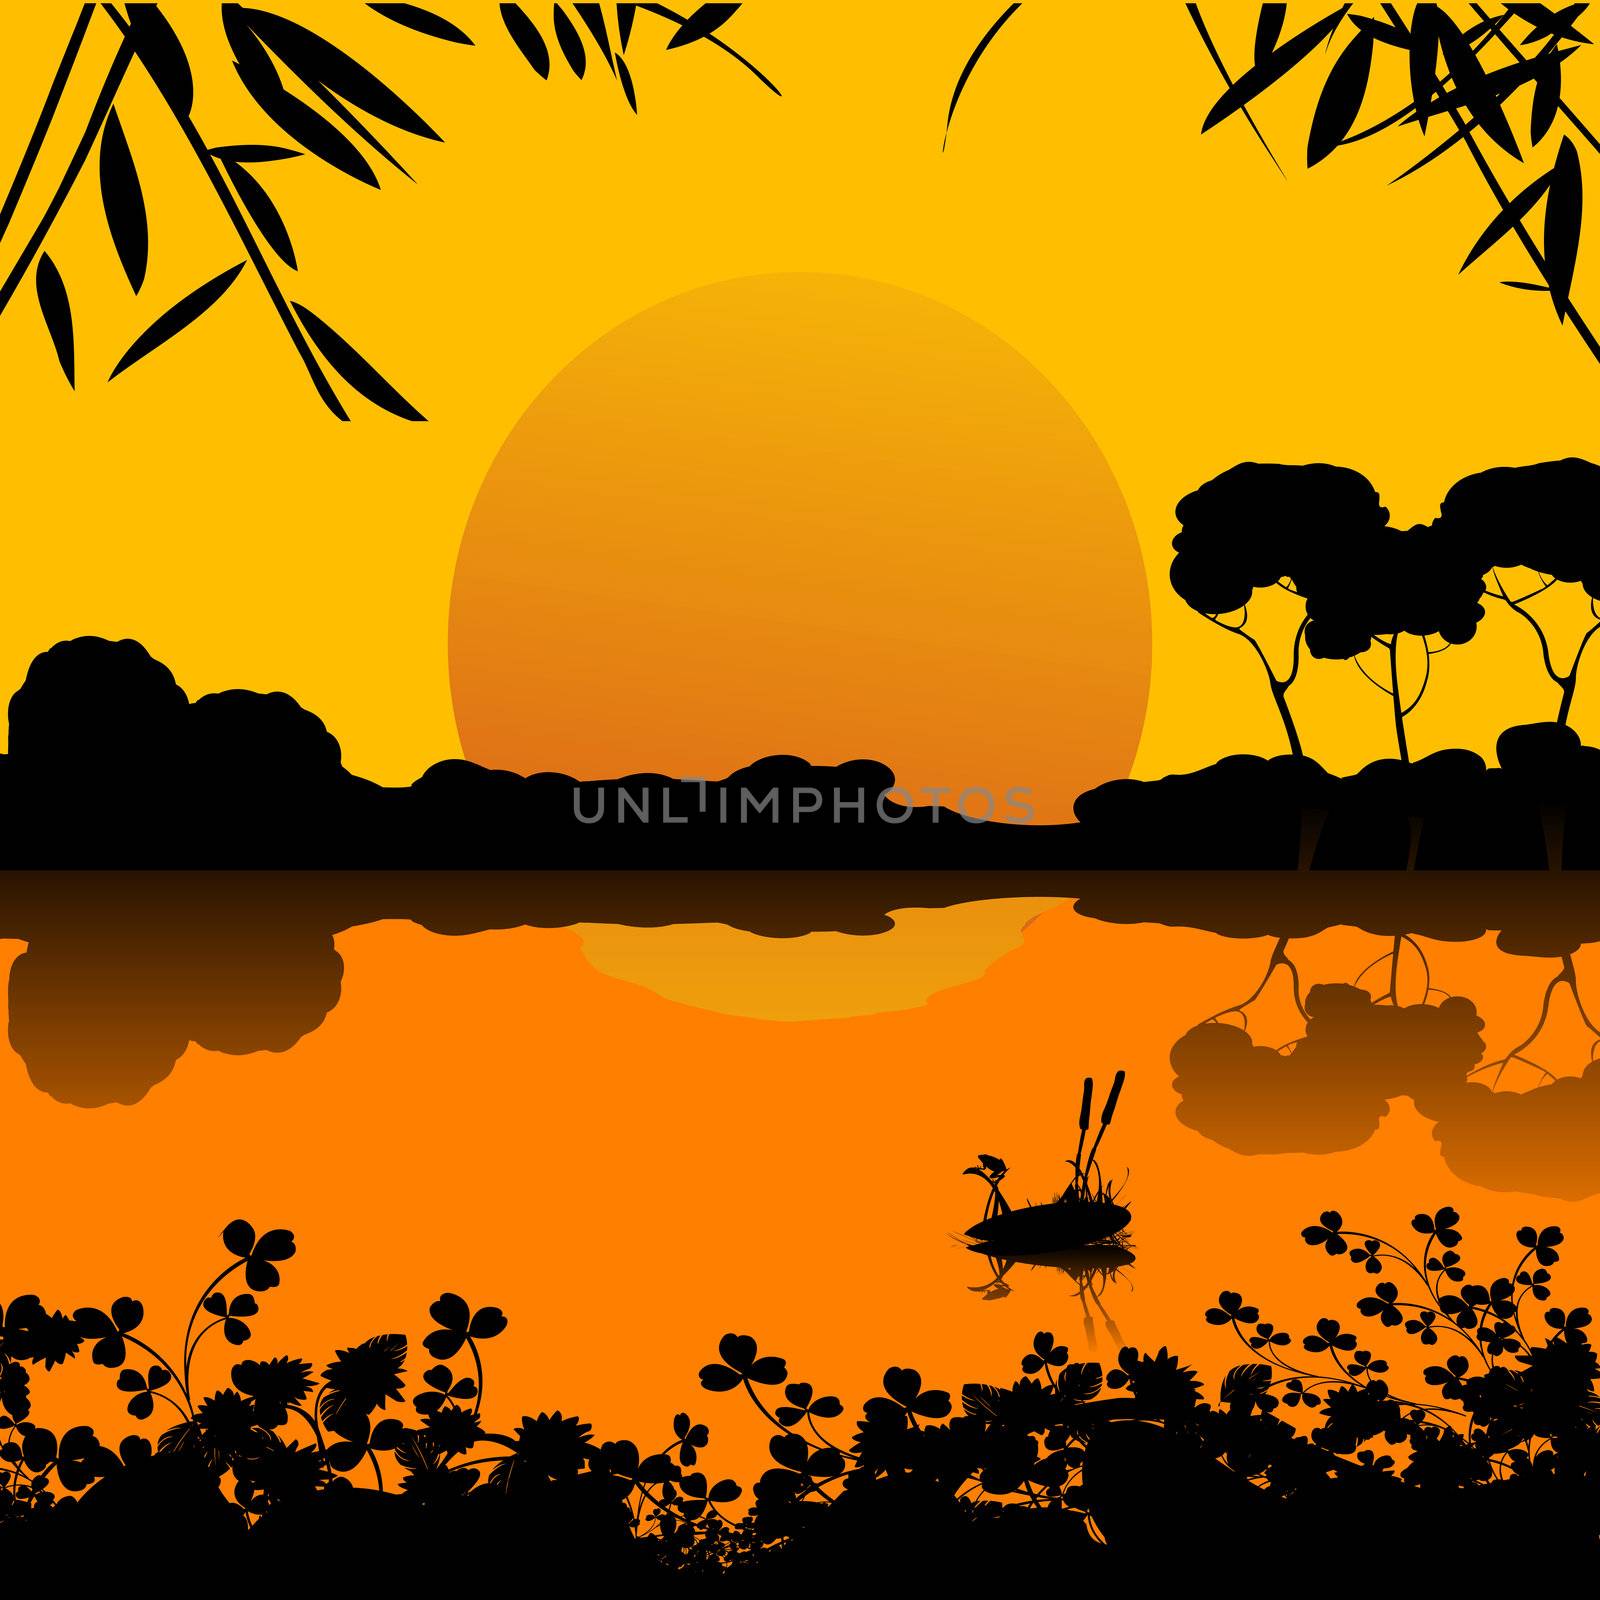 Background romantic with a sunset on a lake scene